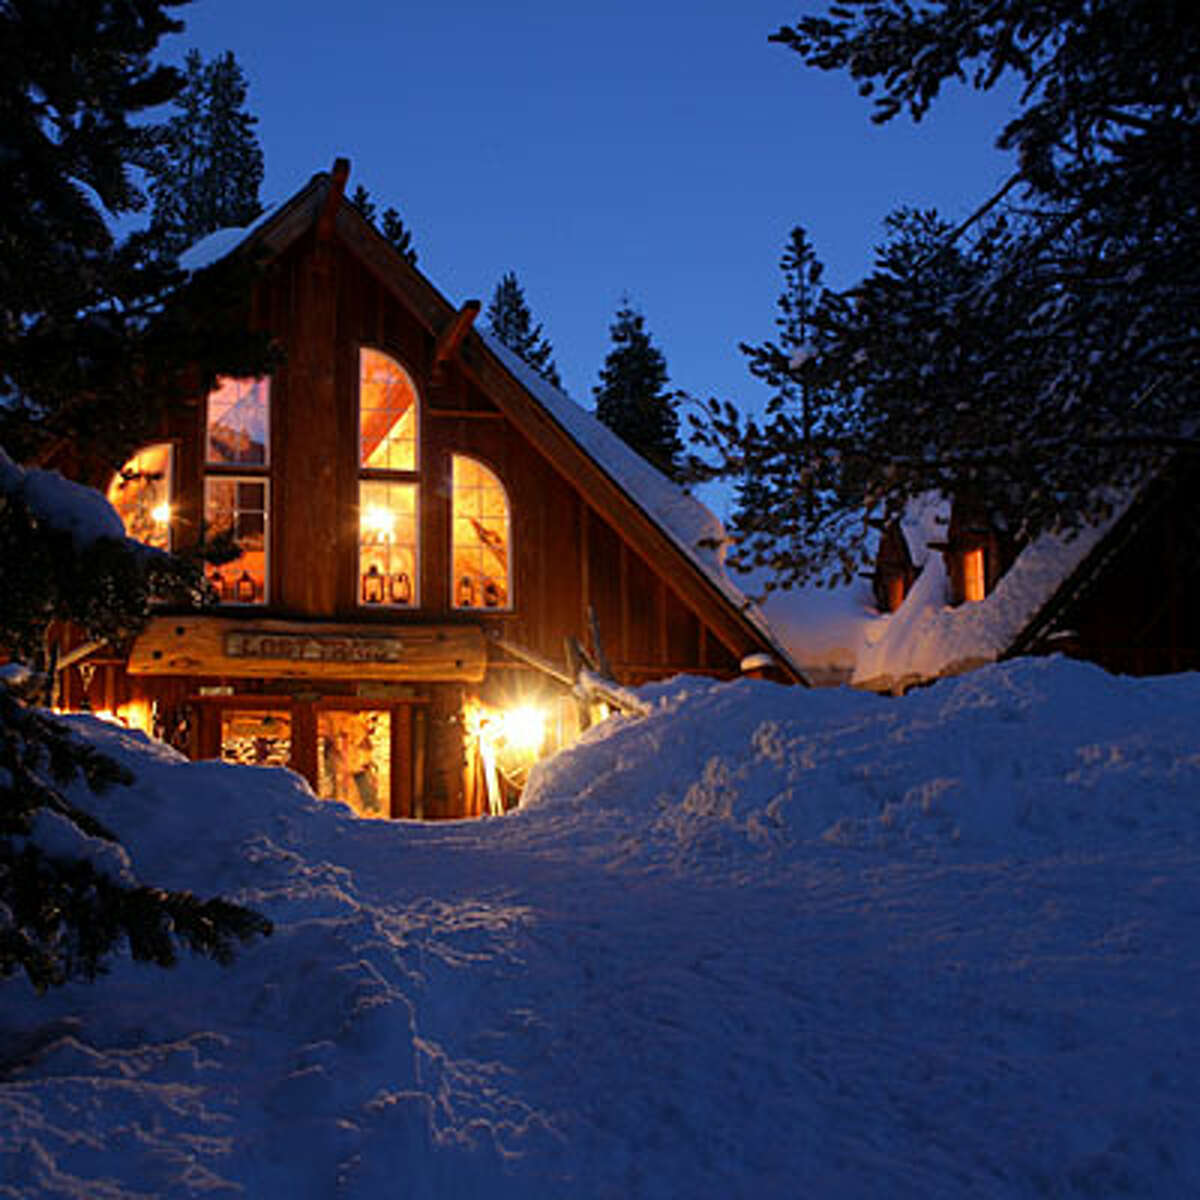 Lost Trail Lodge Truckee, CA It takes a 4-mile trek on cross-country skis, amid endless Sierra views, to reach this mellow backcountry lodge. Your reward: a stove-heated room—one of four in the lodge (there’s a bathroom-less cabin too)—and a veritable Americana museum to browse post-sledding.  From $89/person; 2-night minimum; losttraillodge.com  